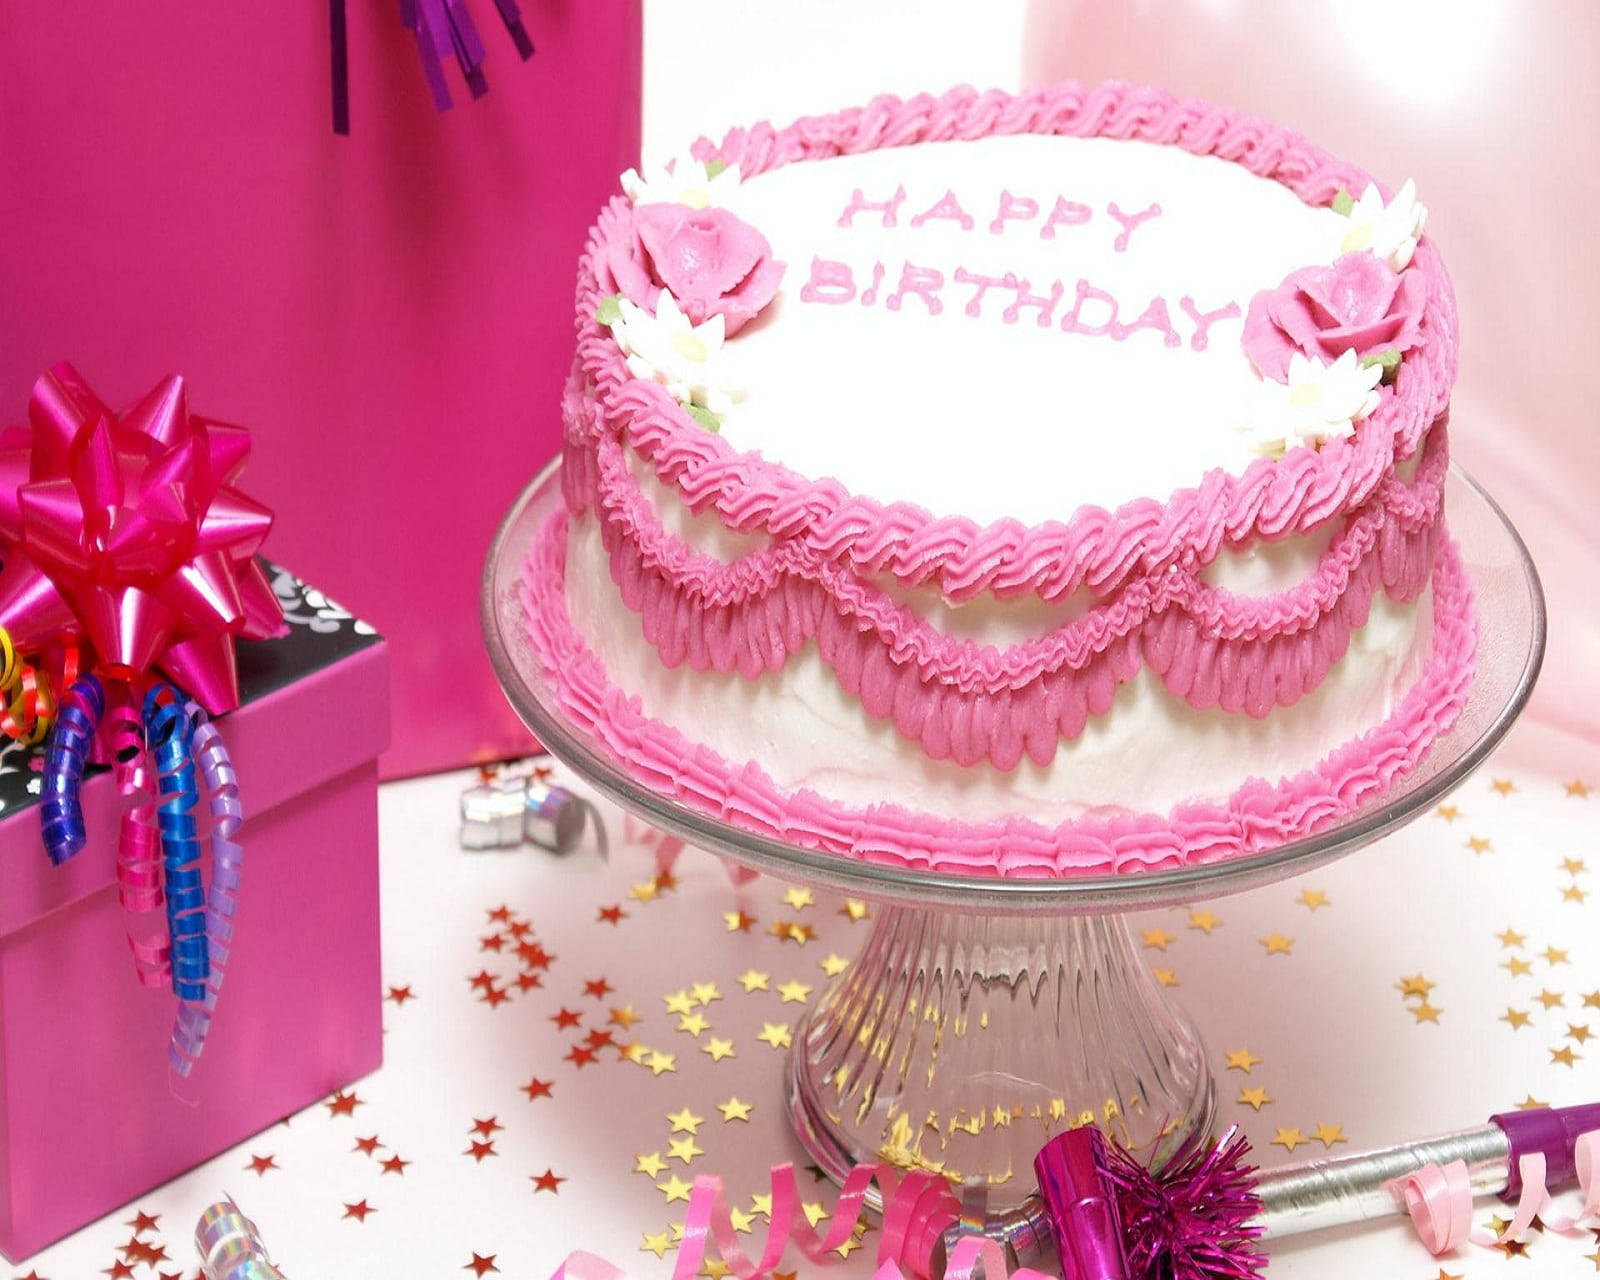 Pink Cake And Gift For My Birthday Wallpaper